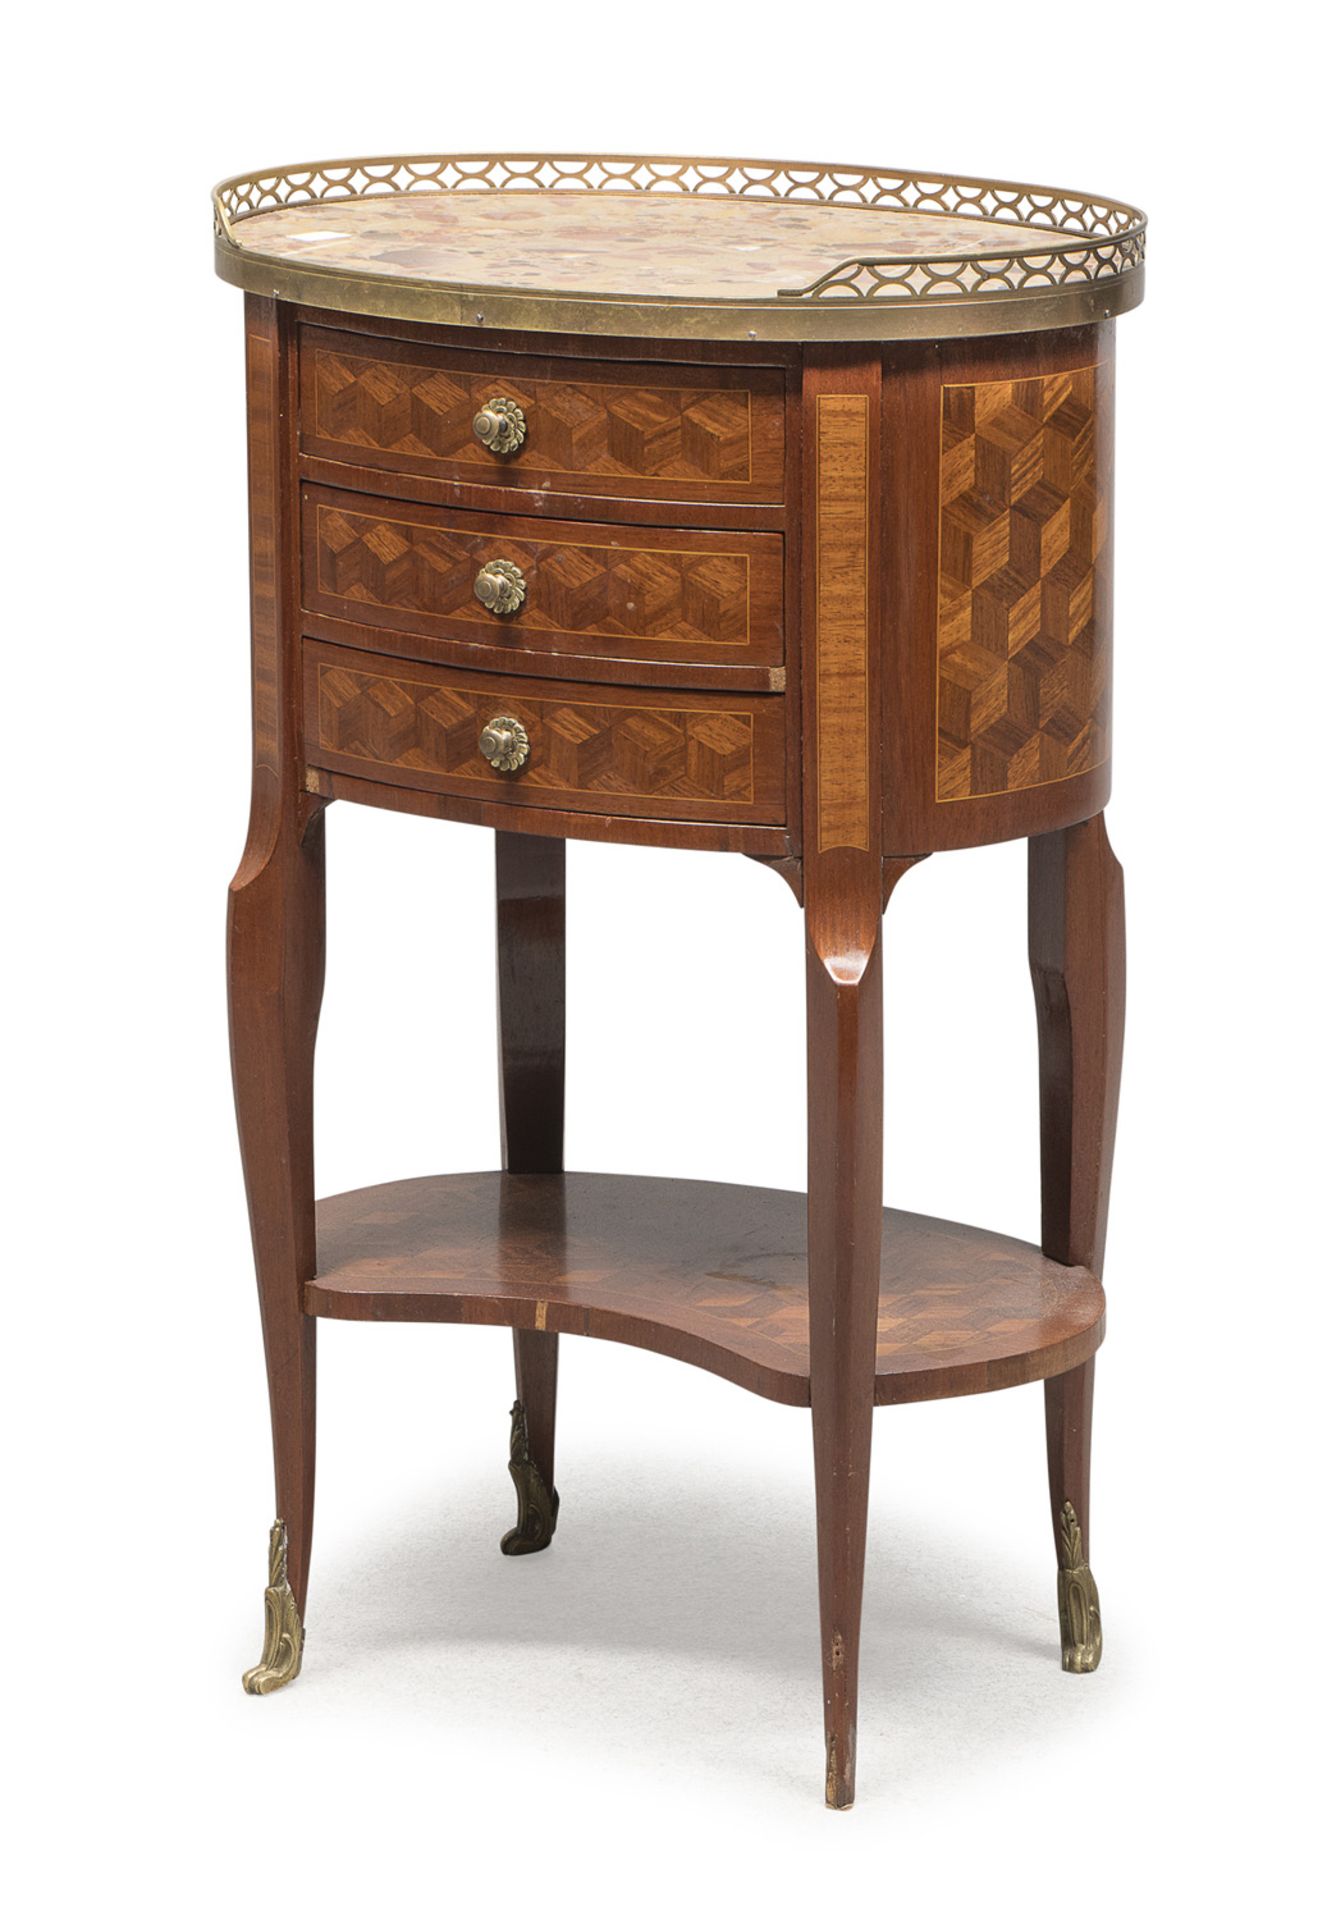 BEDSIDE TABLE IN VIOLET EBONY FRANCE 19TH CENTURY